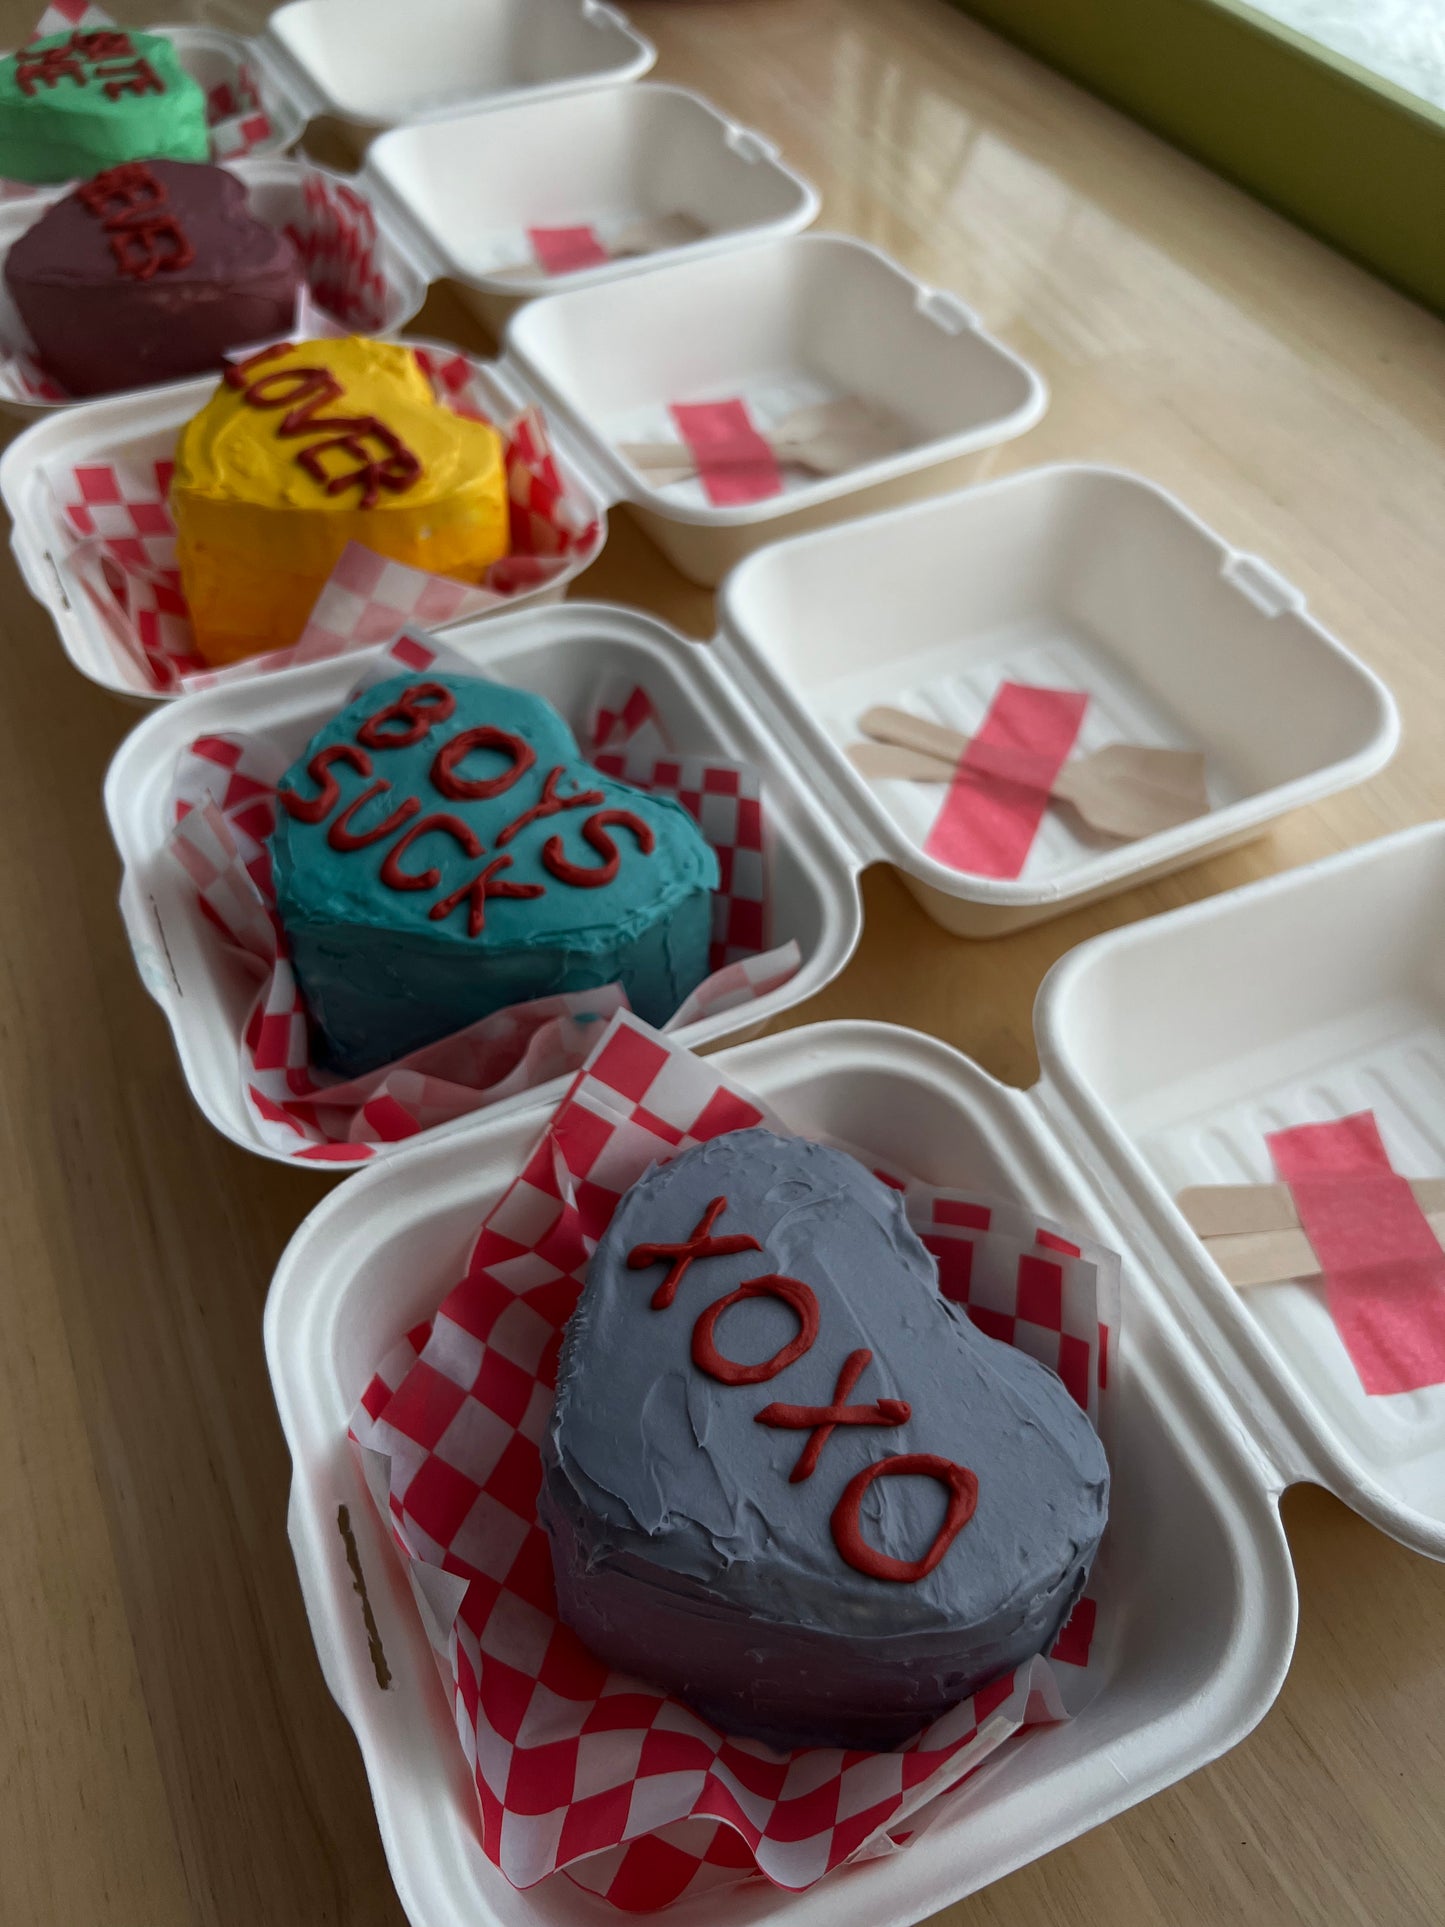 Candy Heart Cakes